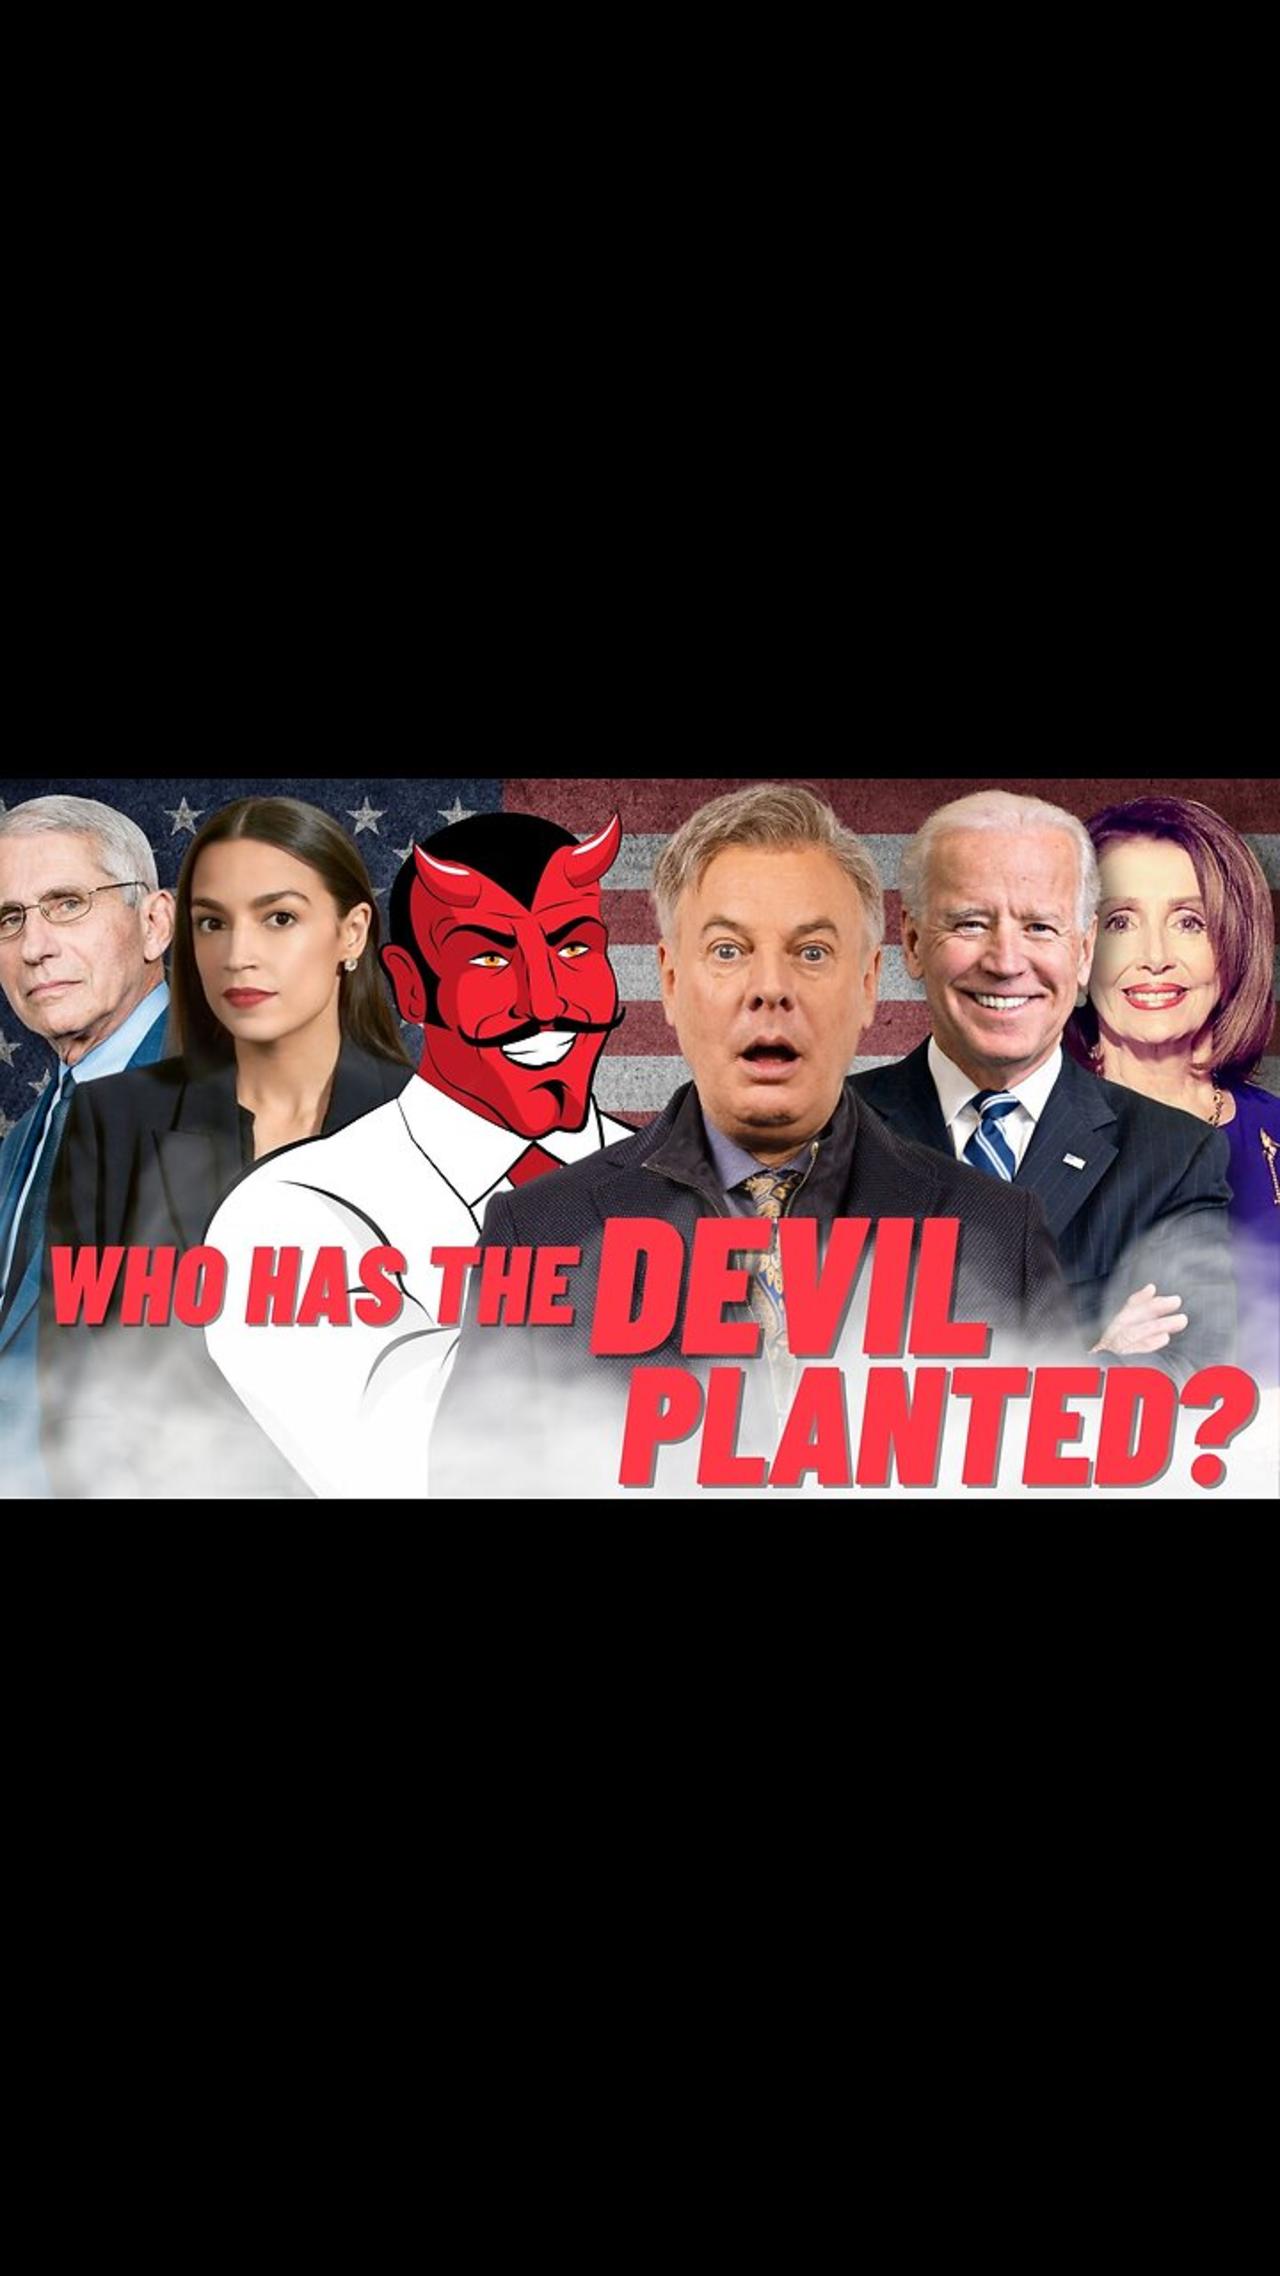 Who has Satan planted in positions of power?